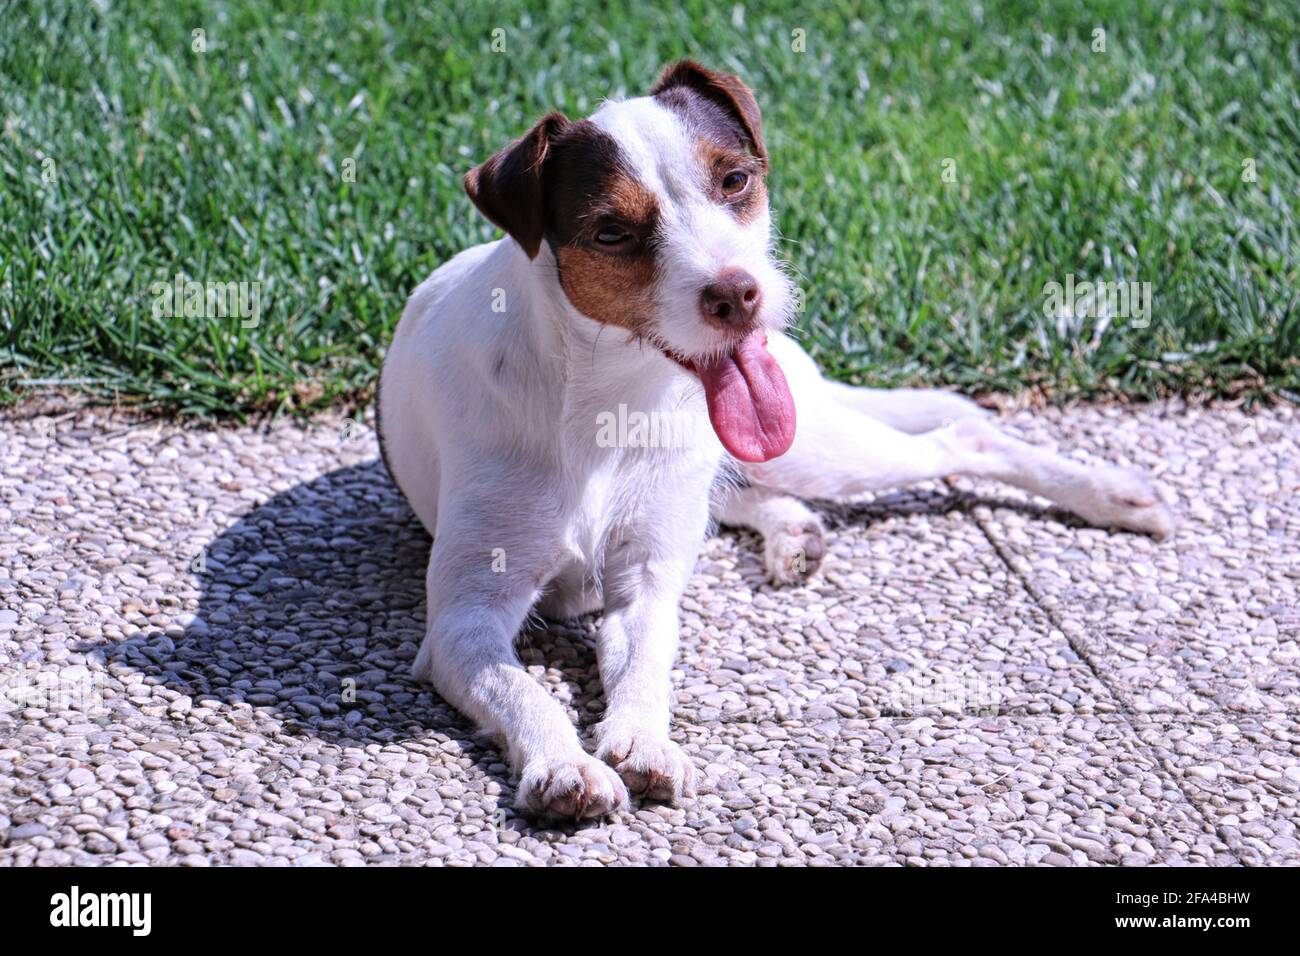 Small dog (Parson russel Terrier) relaxing under the sun Stock Photo